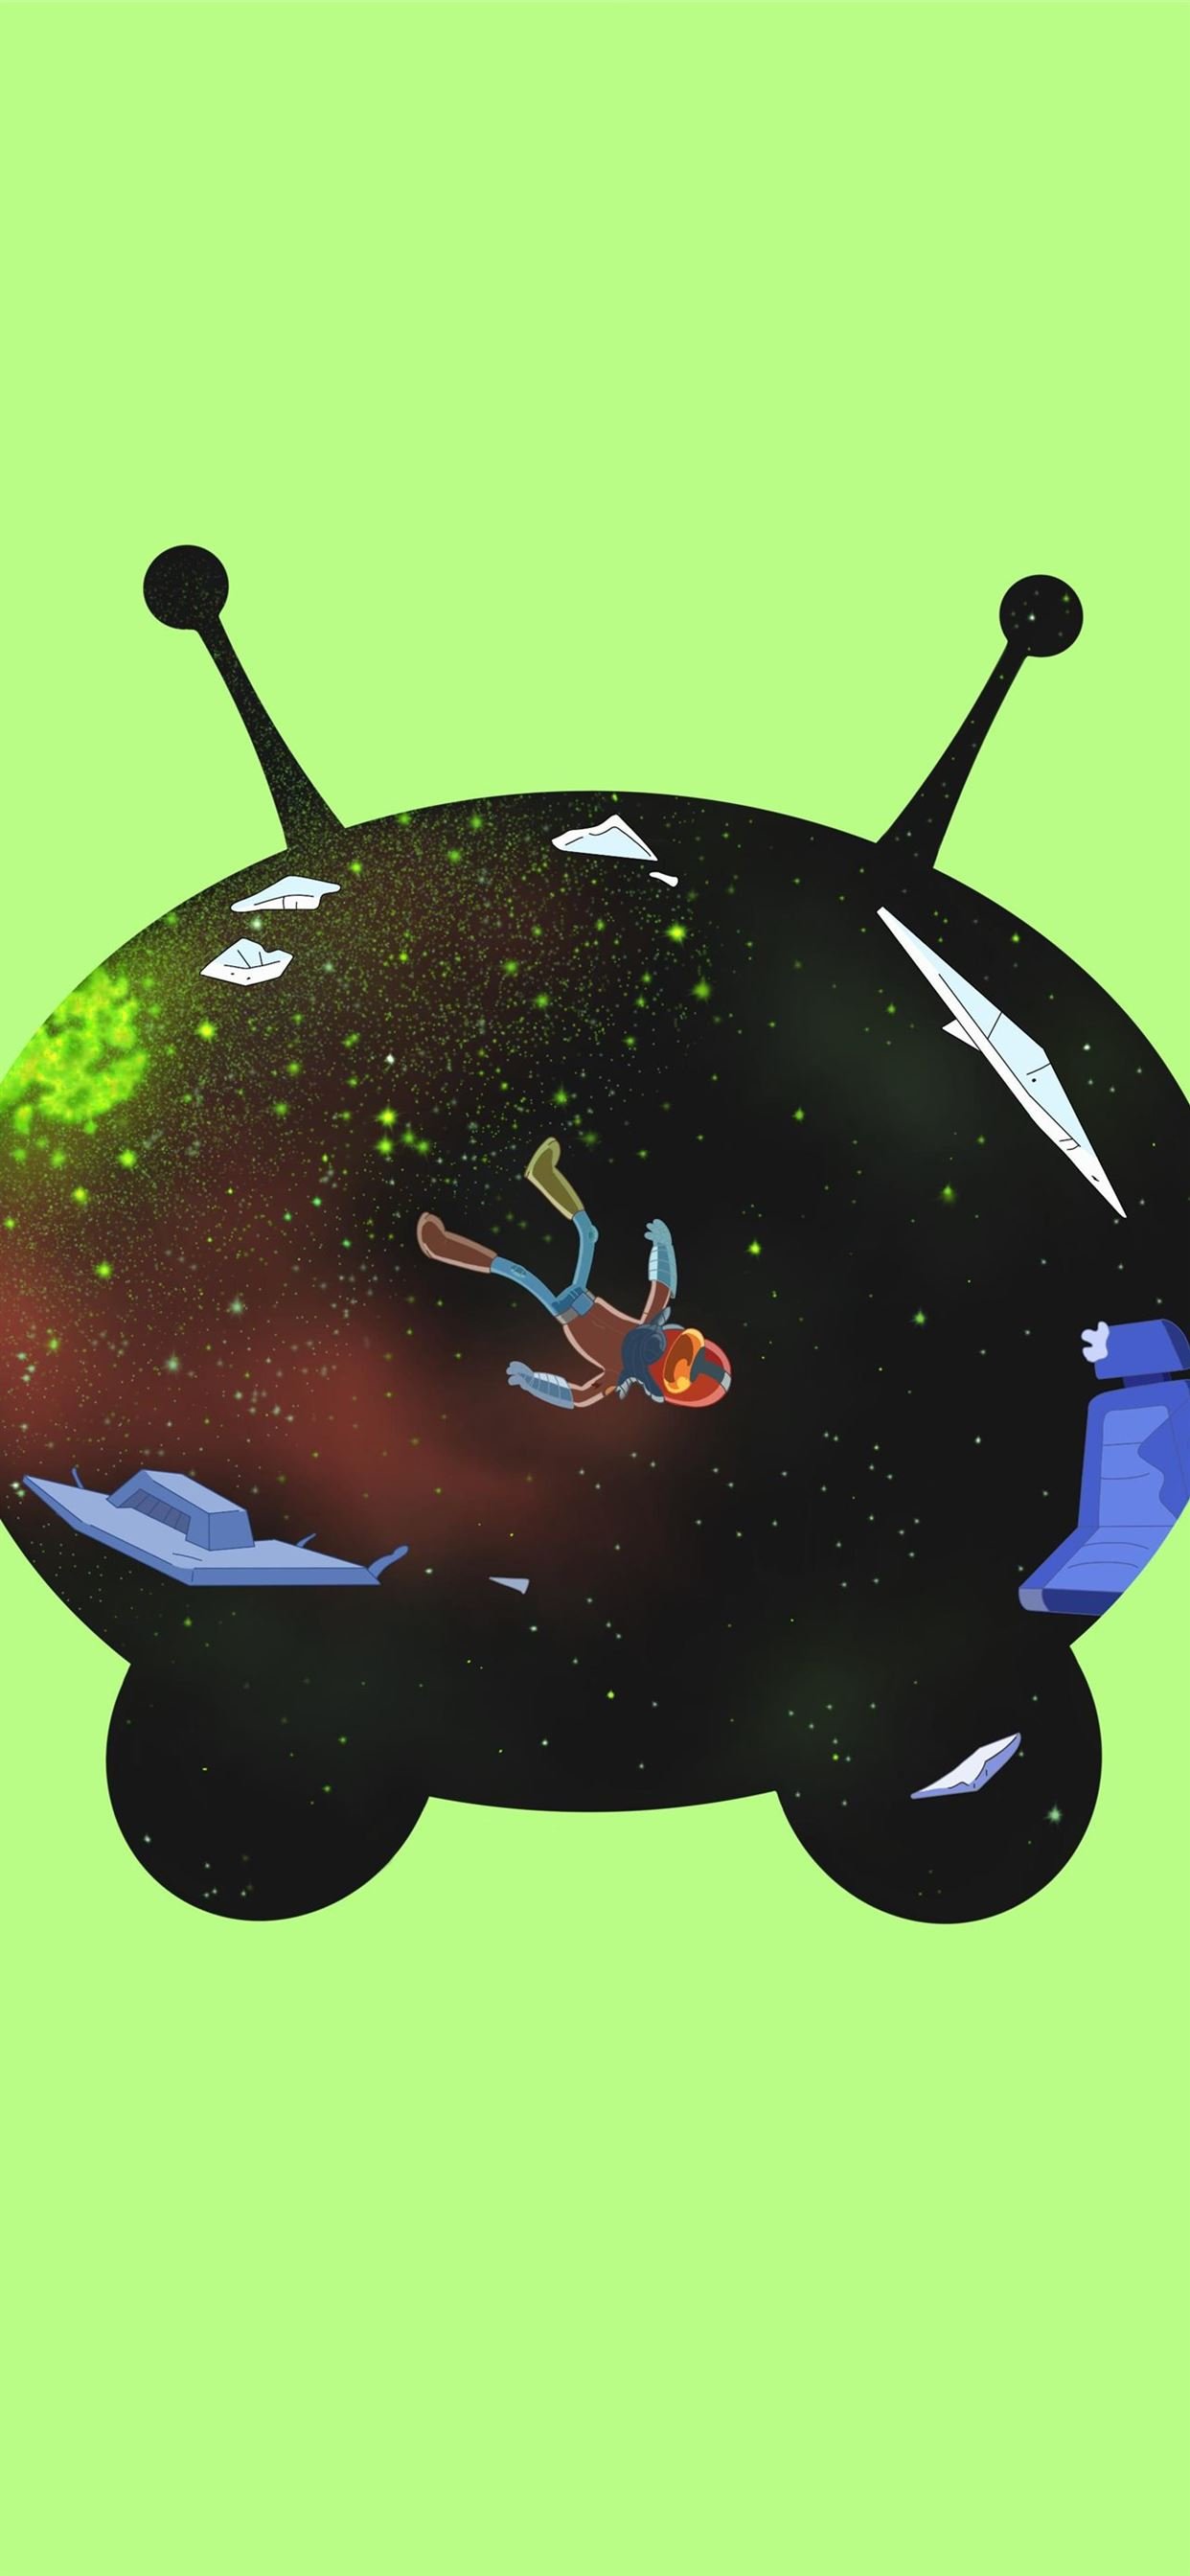 Some Final Space art I did with Gary and Mooncake. iPhone Wallpaper Free Download